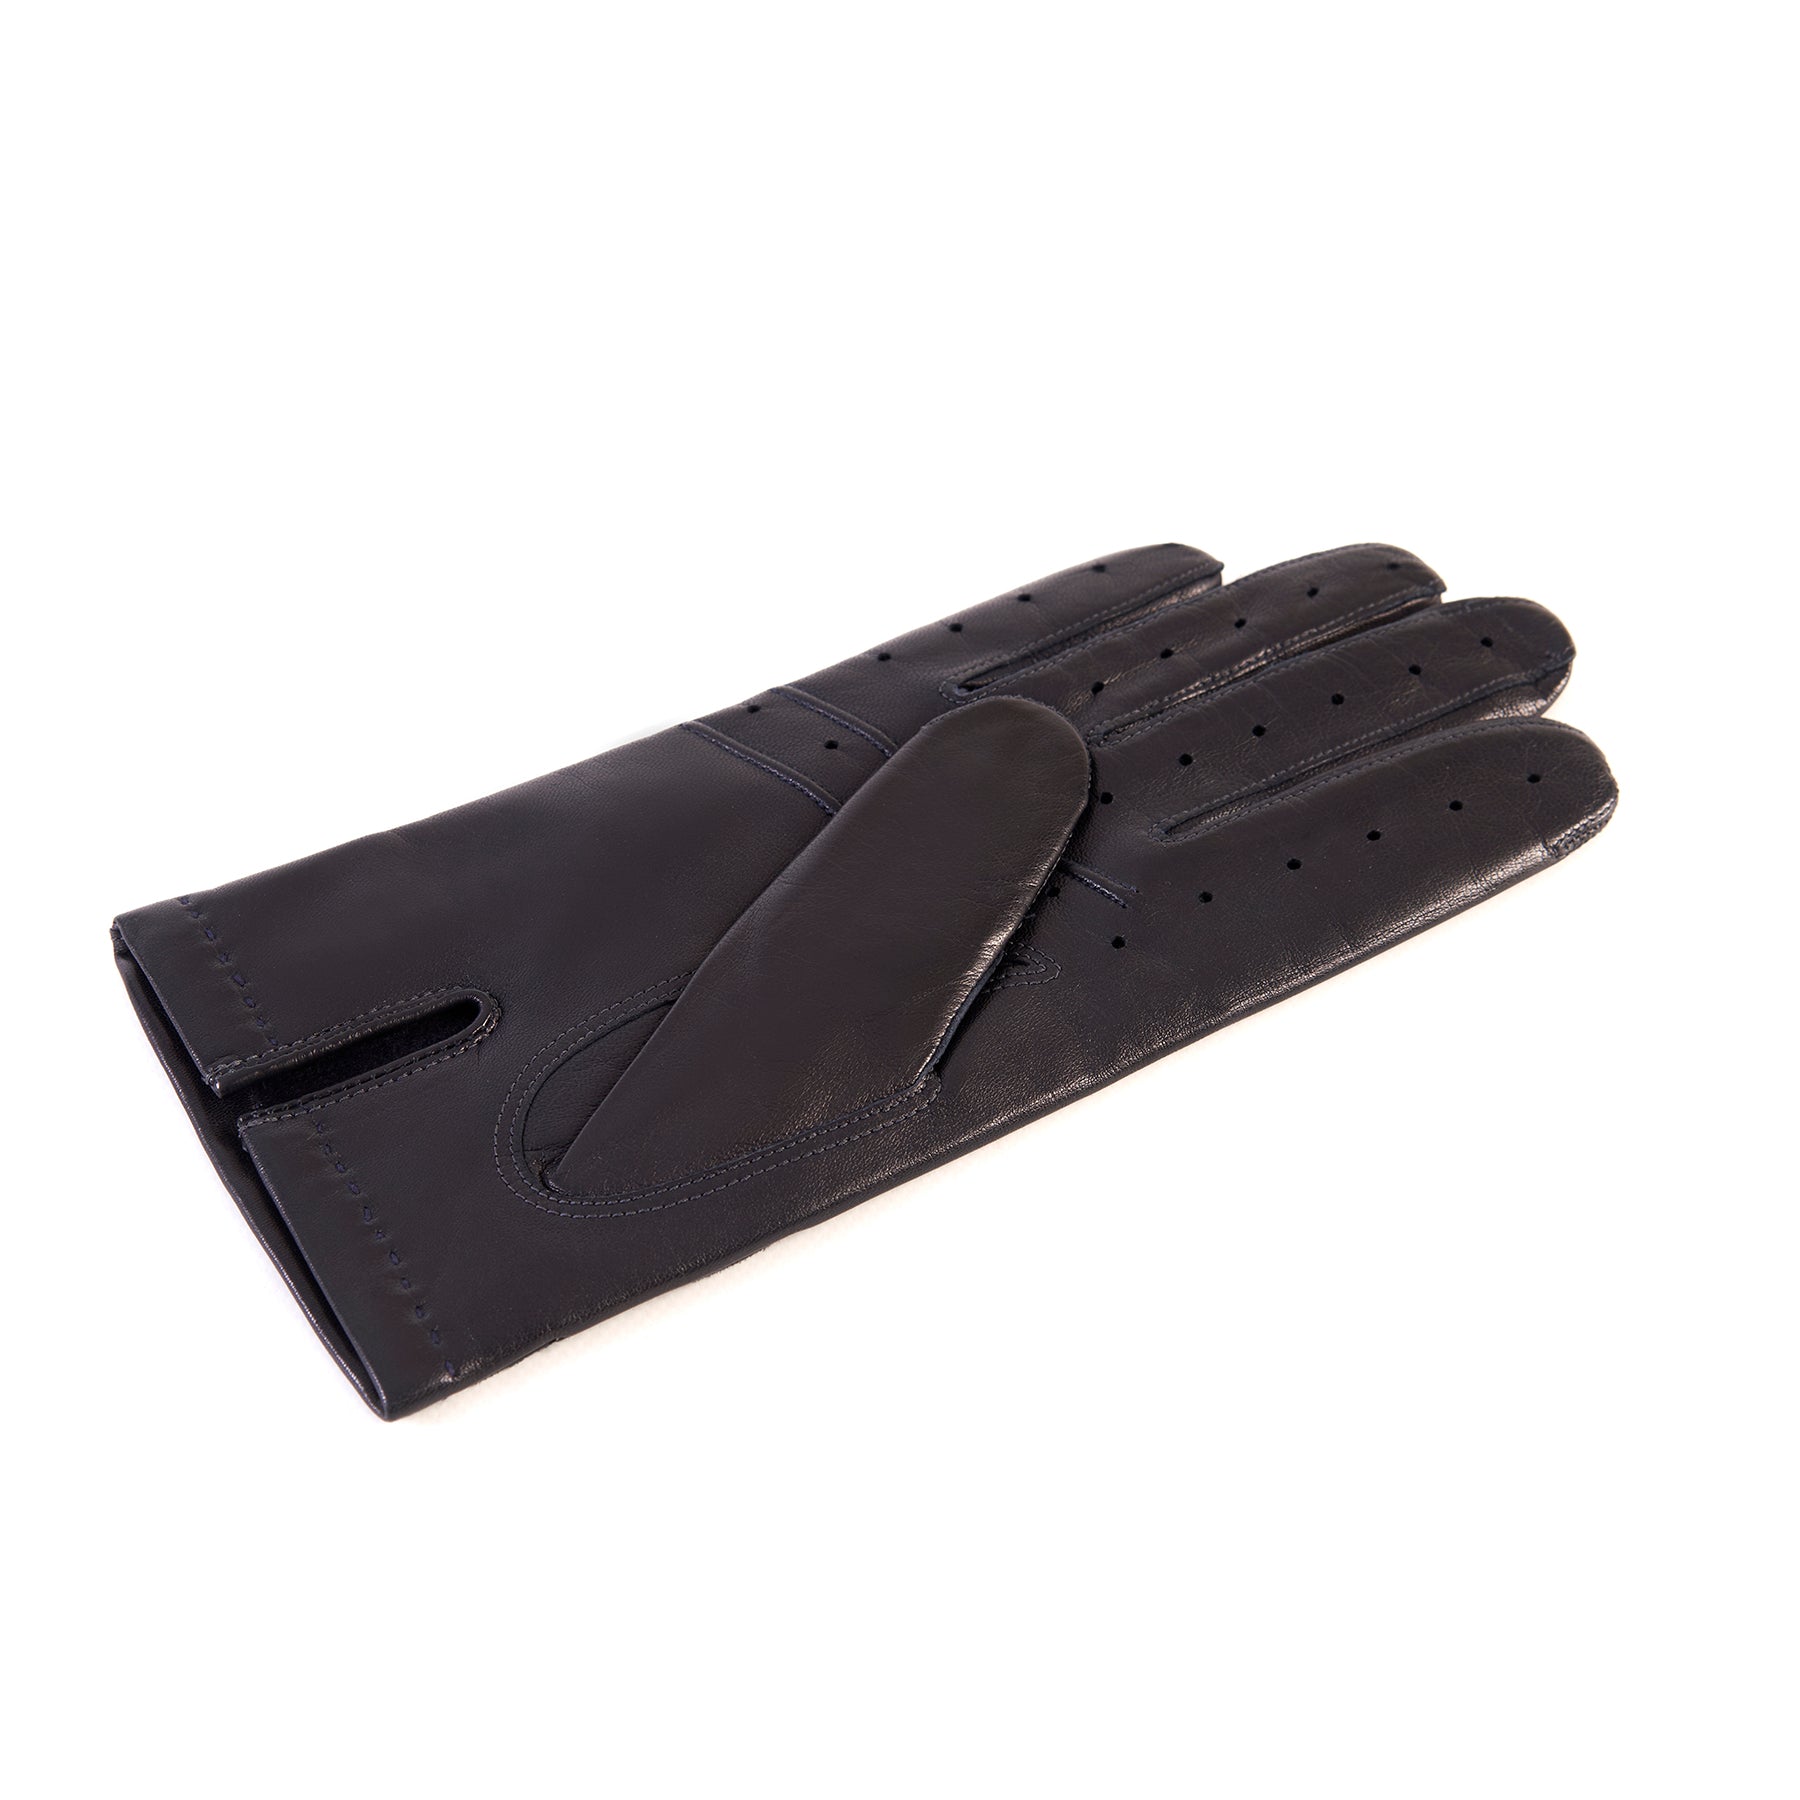 Men's dark navy leather gloves with suede panel inserts on top mix cashmere lined